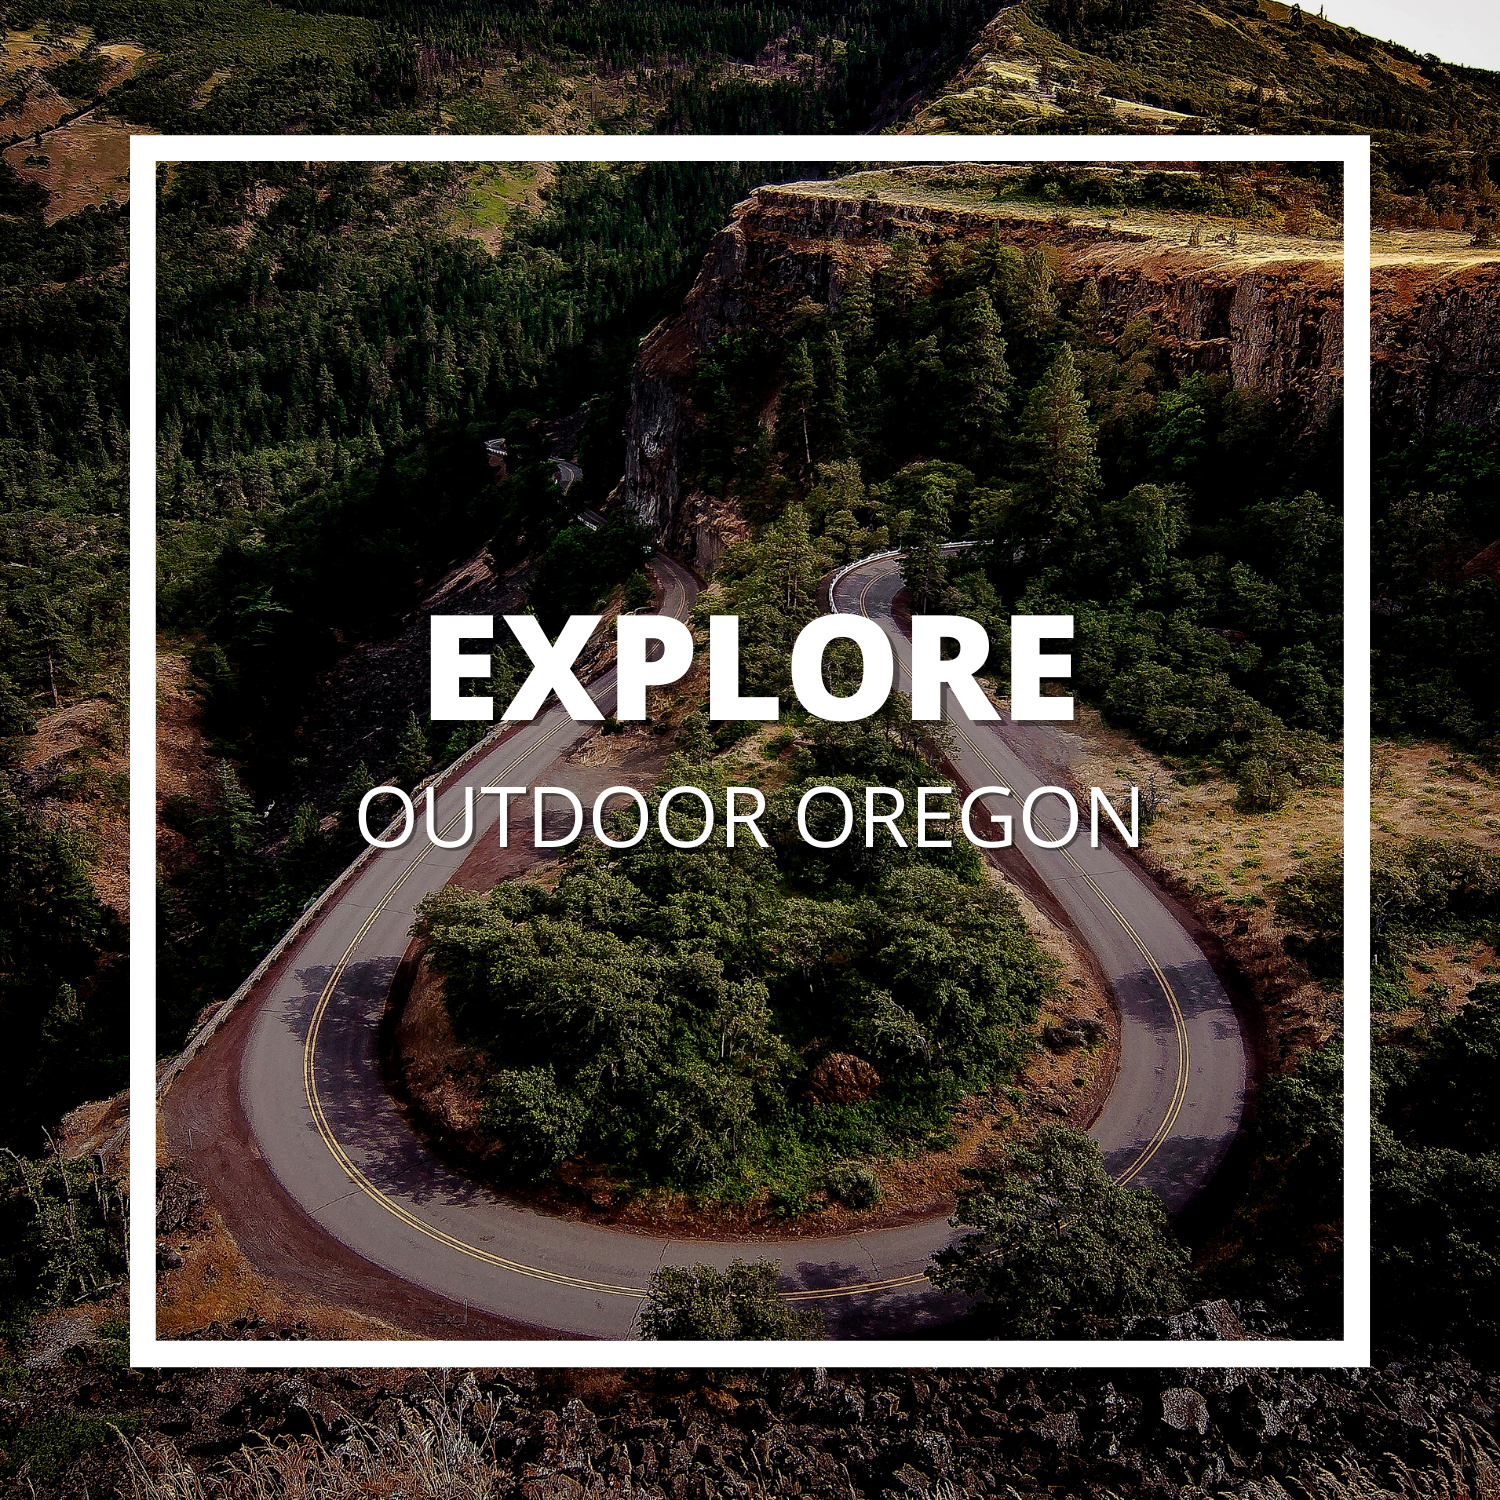 Home, Explore Oregon, Outdoors, Nature, Travel, Hike, Josie Carothers, Real Estate, Lane County